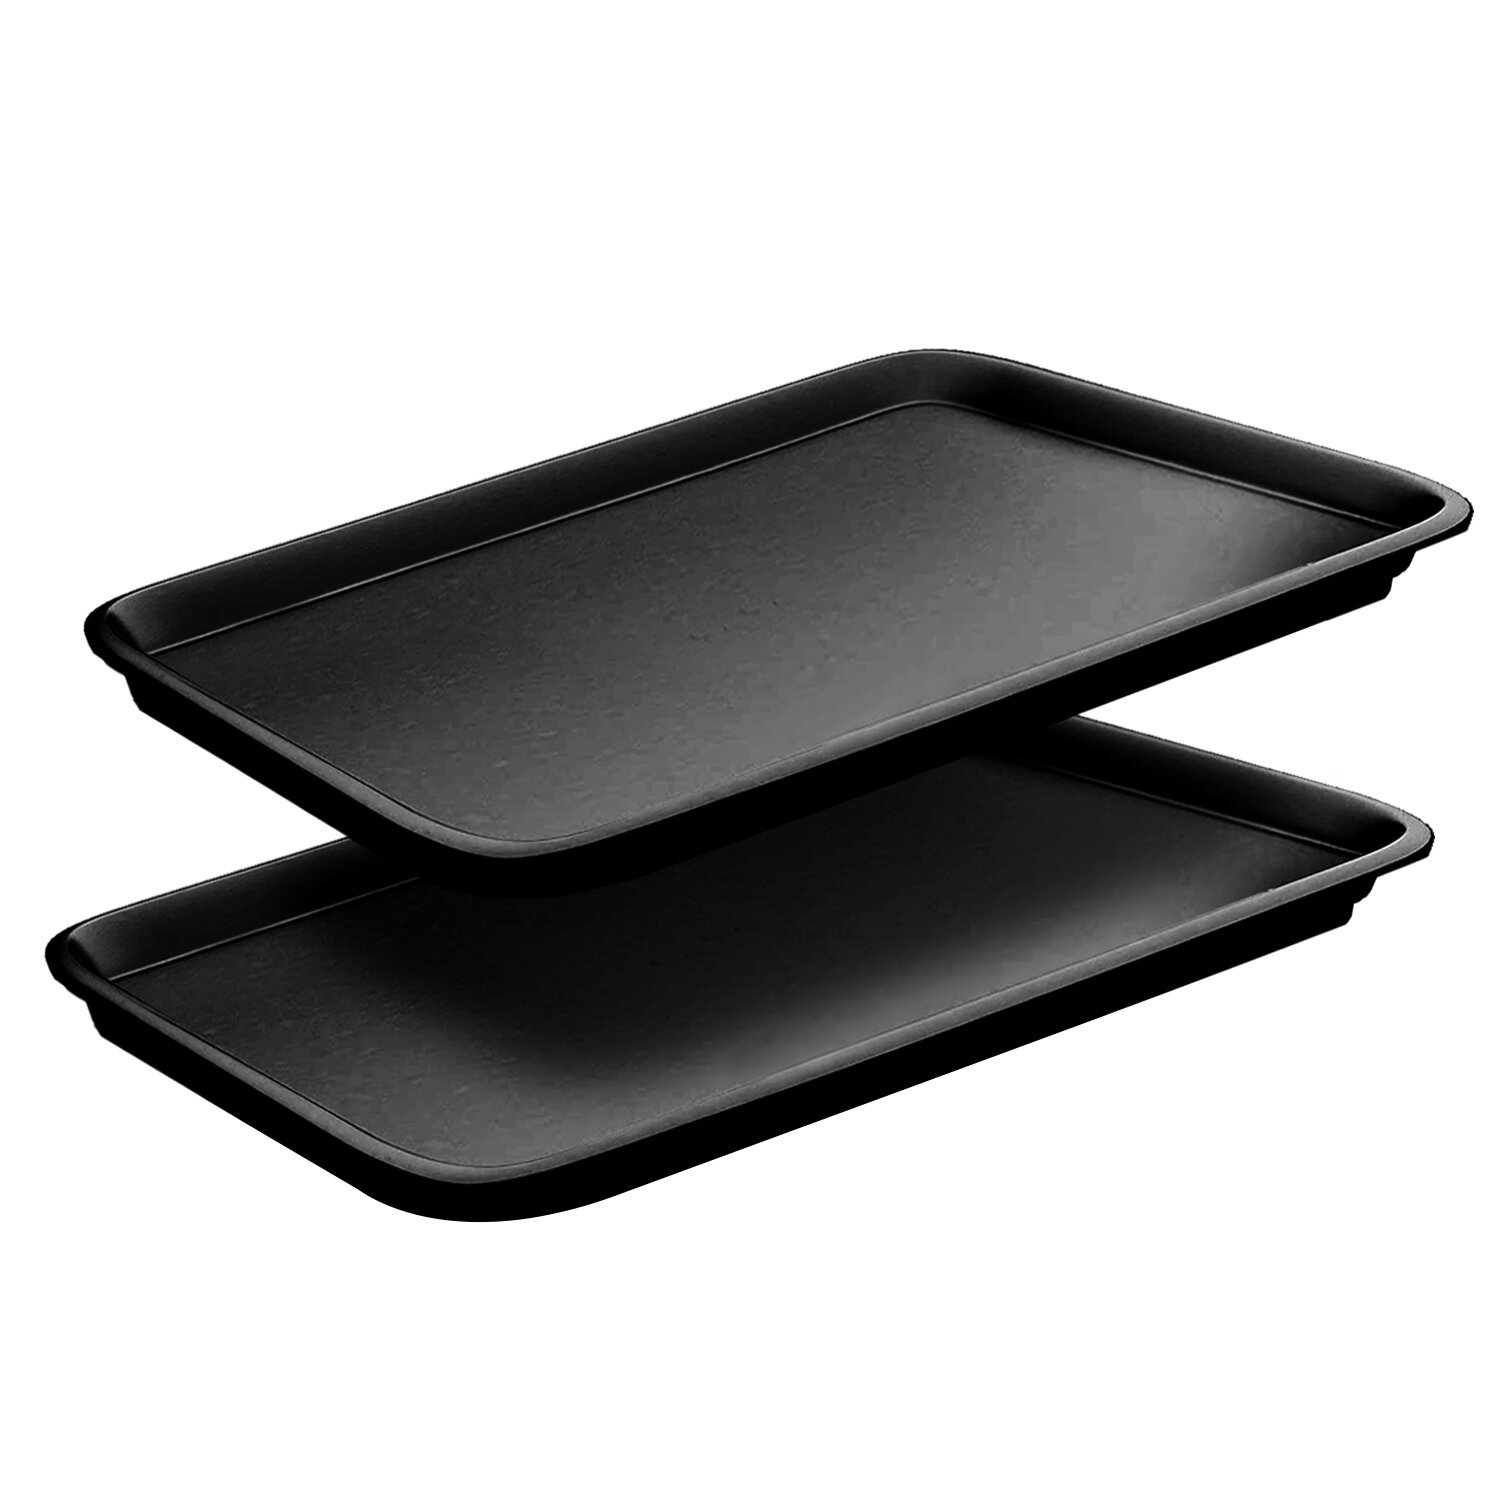 Jelly Roll Baking Sheet Pans - Professional Aluminum Cookie Sheet Set of 2  - Rimmed Baking Sheets for Baking and Roasting - Durable, Oven-safe